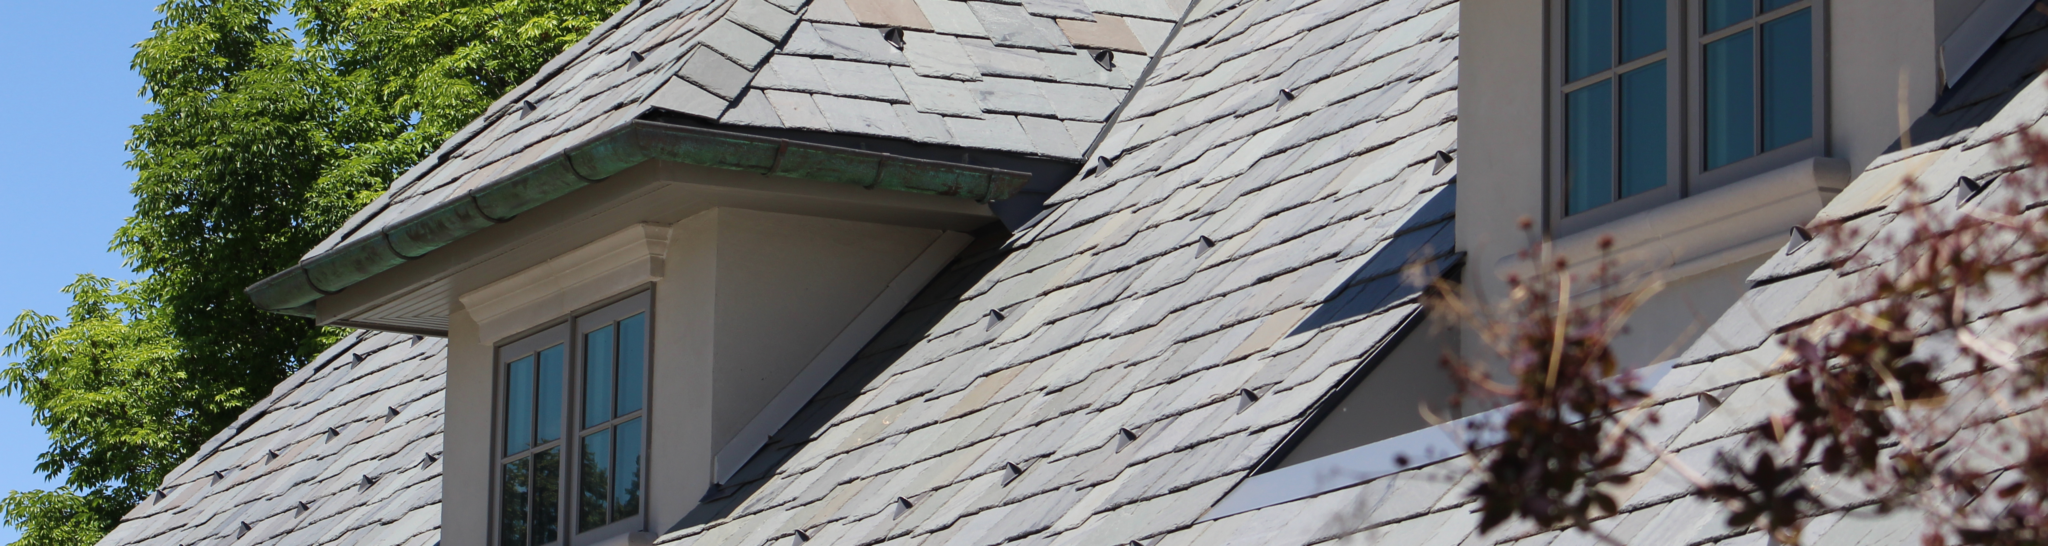 3/8" to 1/2" slate roof. Vermont Gray Black